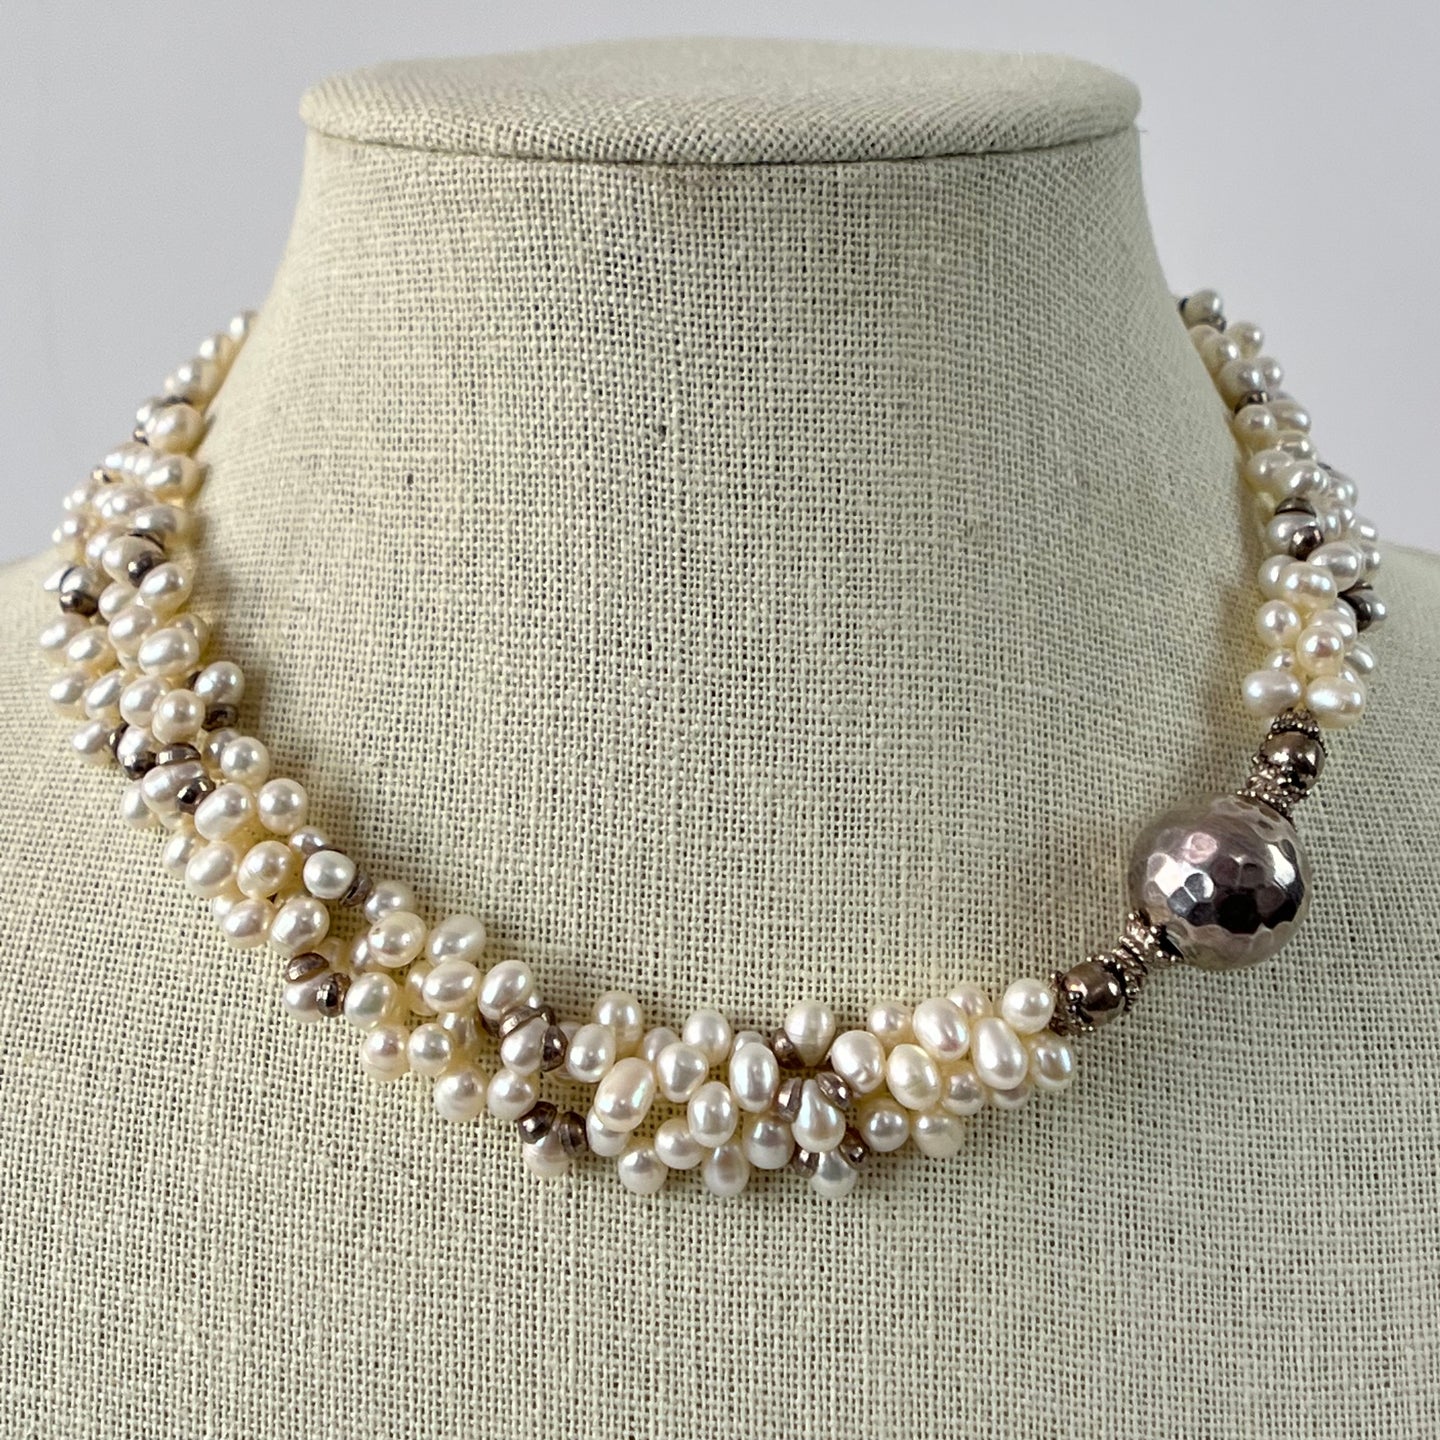 Multi Strand Rice Pearl Necklace with Sterling Silver Accents 17